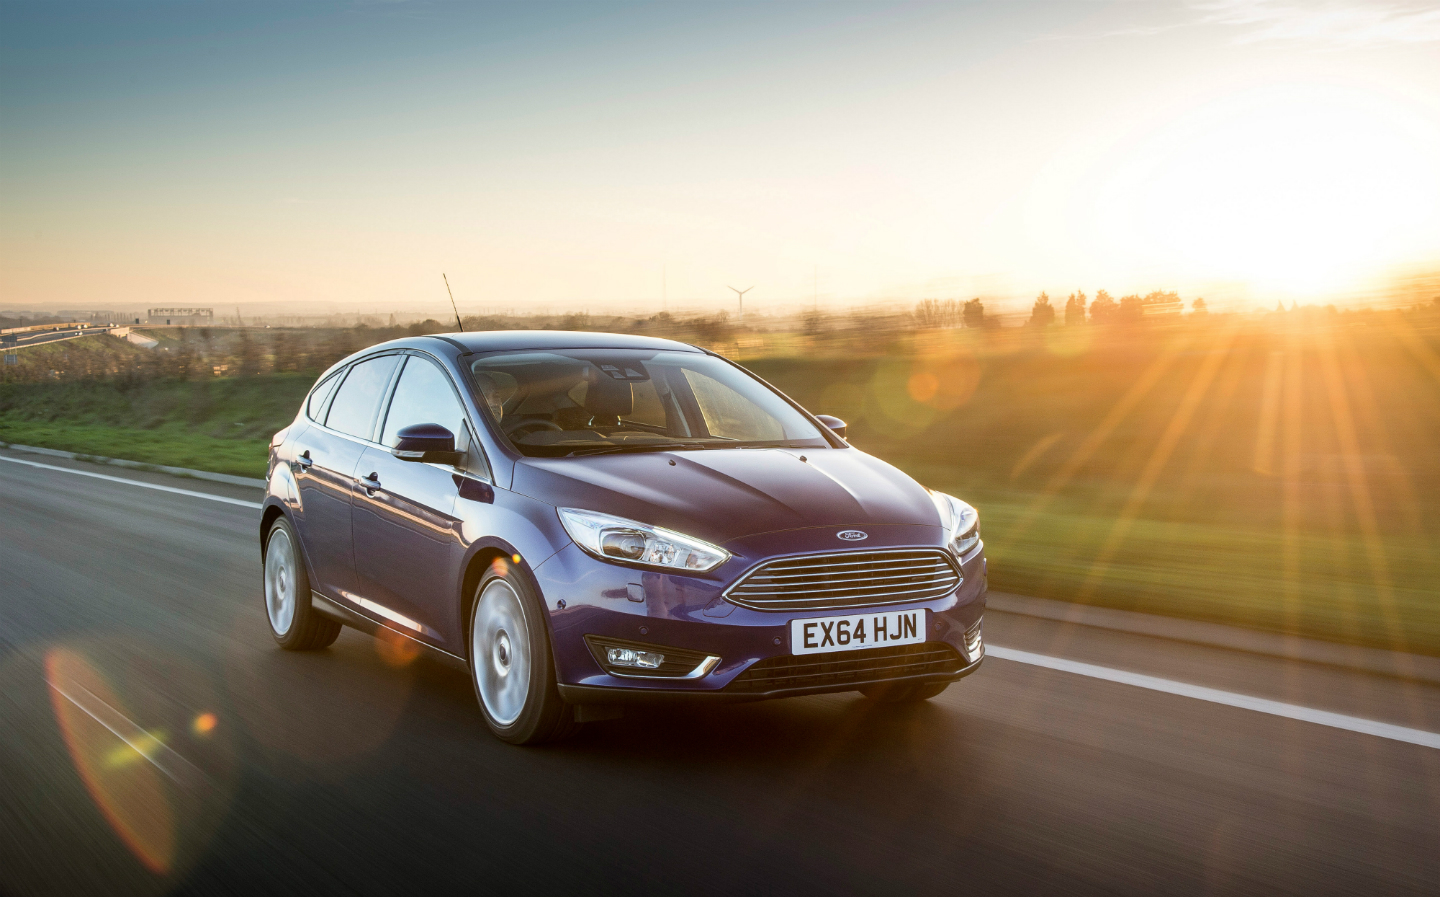 The Ford Focus was Britain's most-clamped car last year